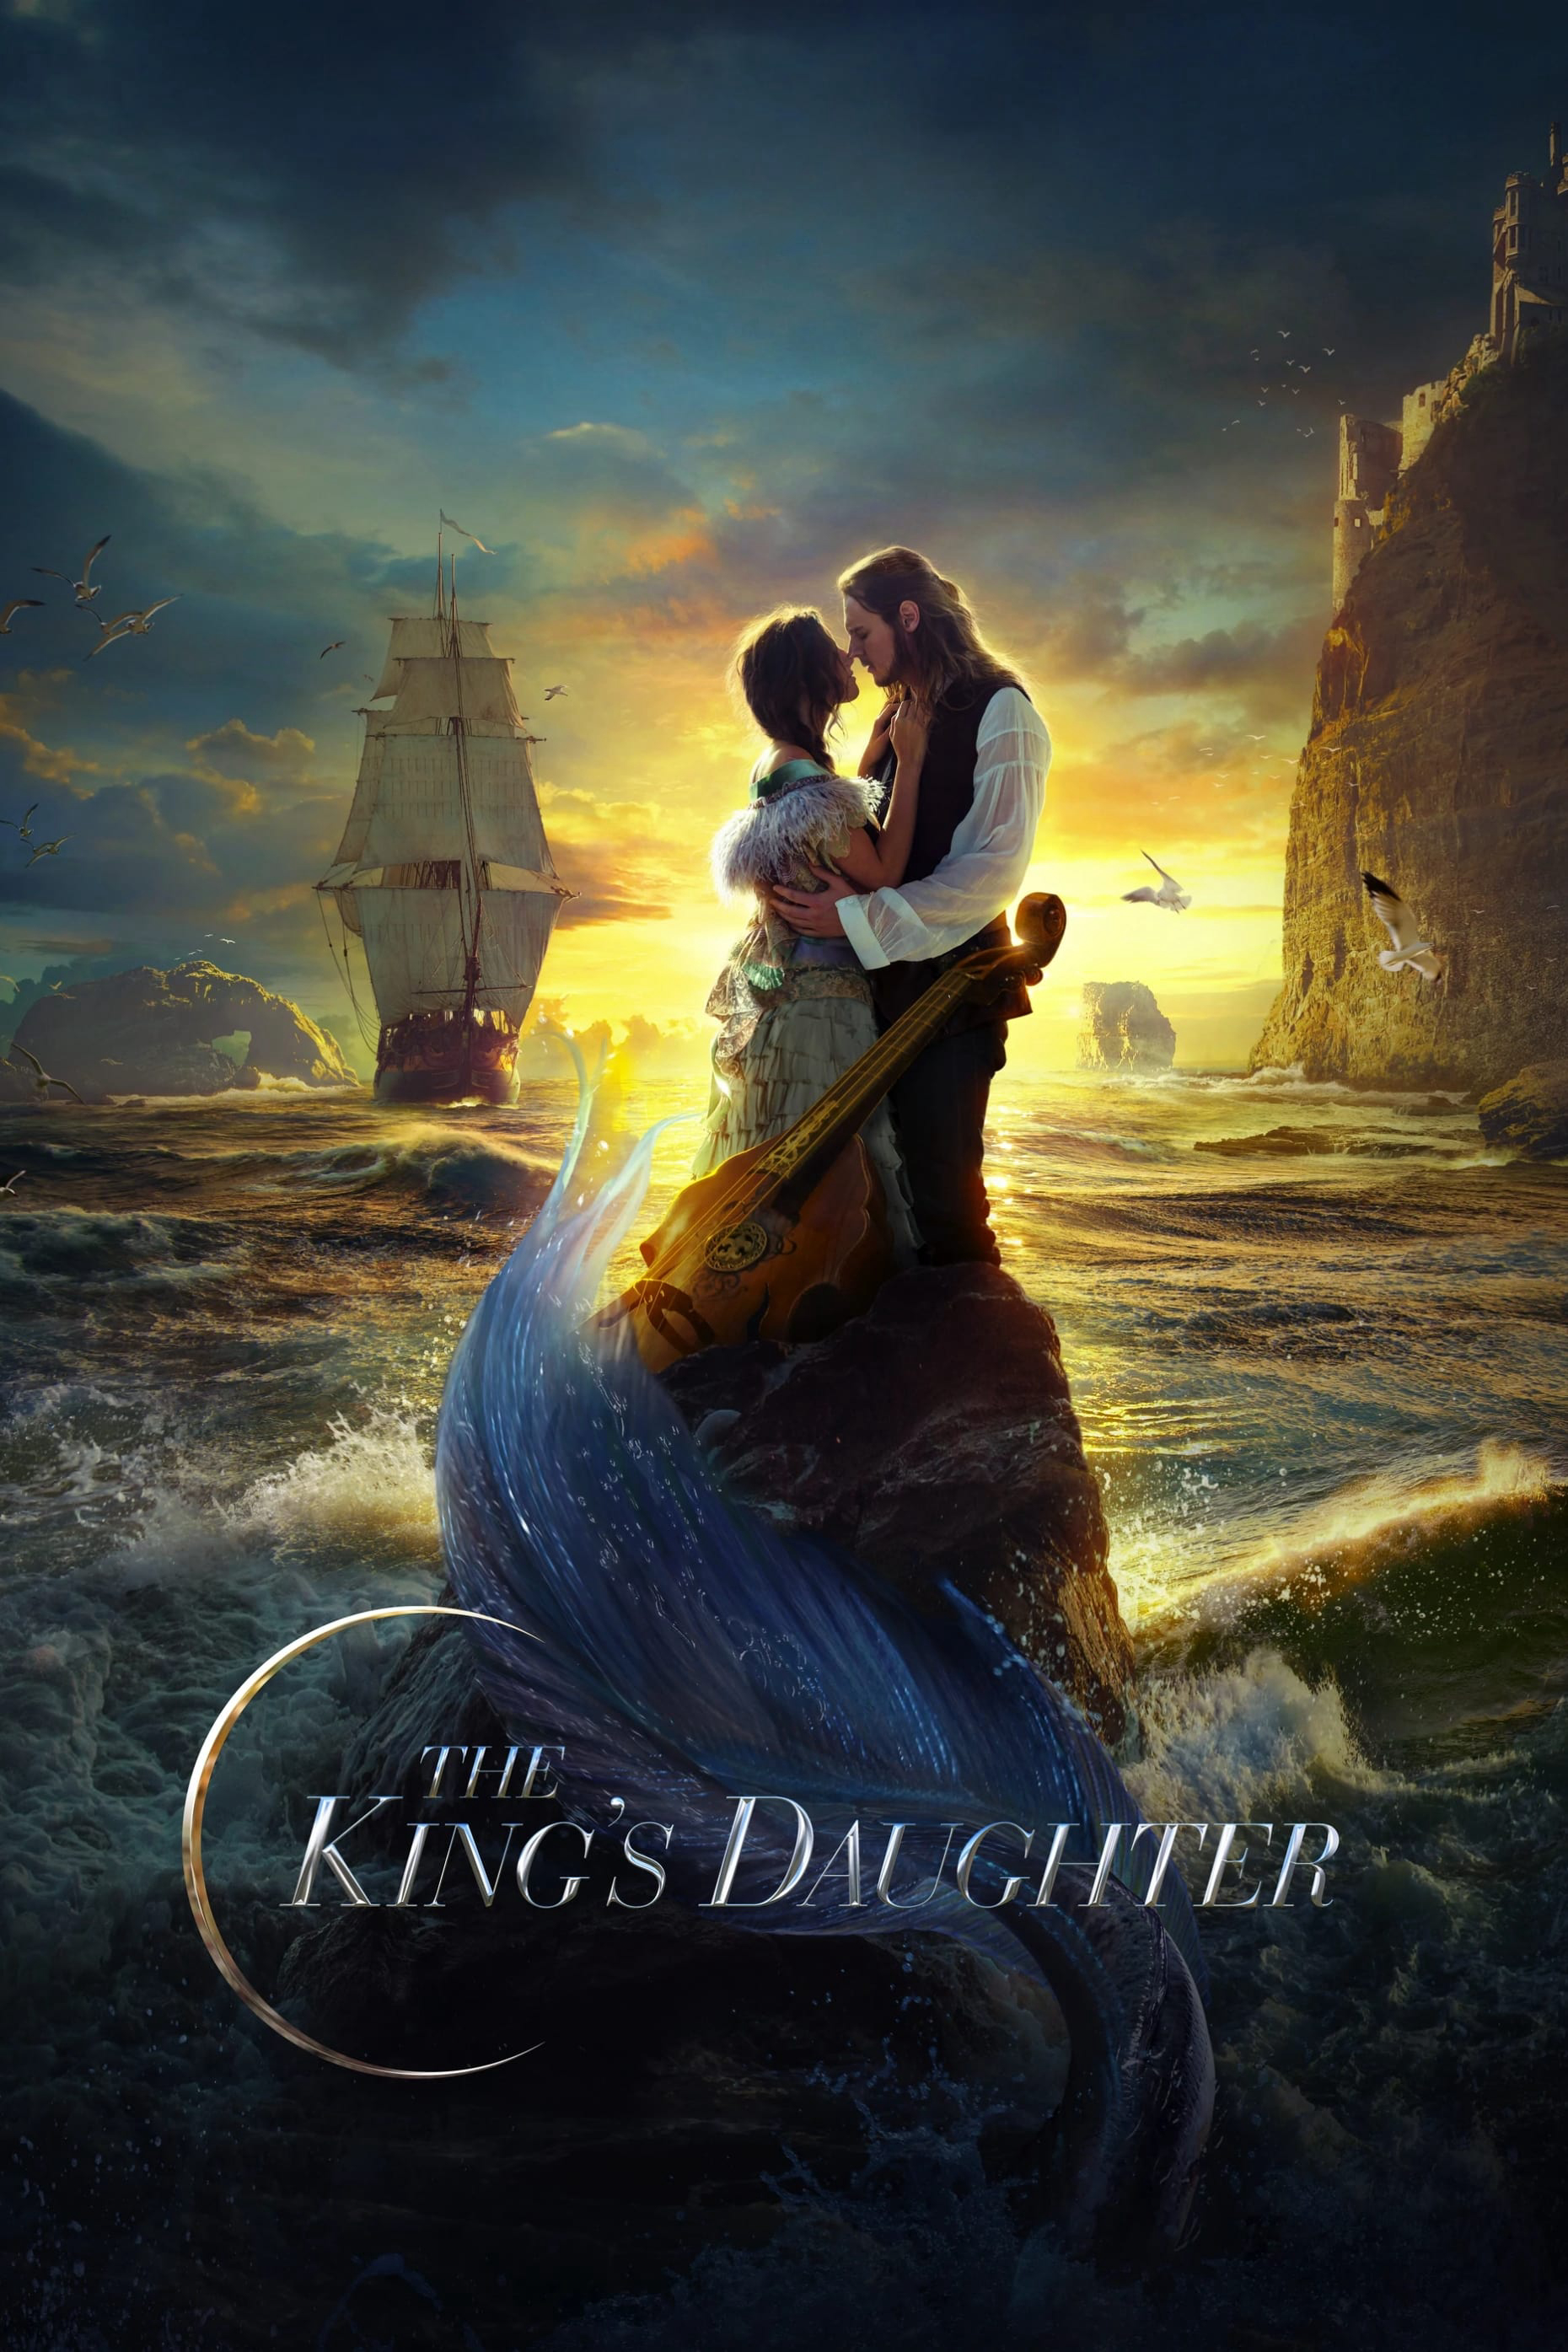 Poster Phim The King's Daughter (The King's Daughter)